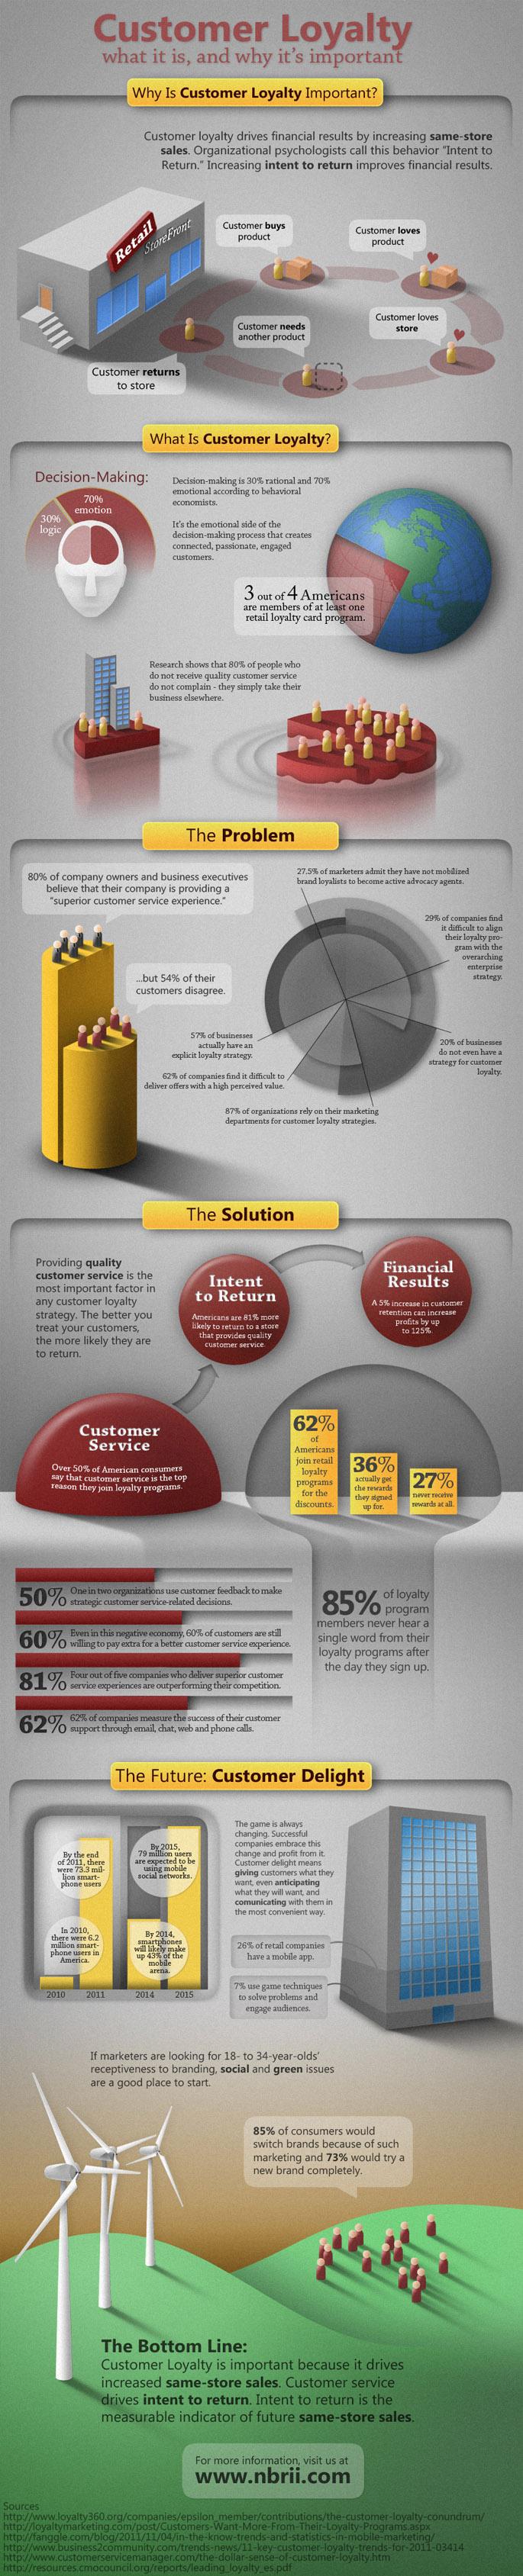 Customer Loyalty Infographic by NBRI